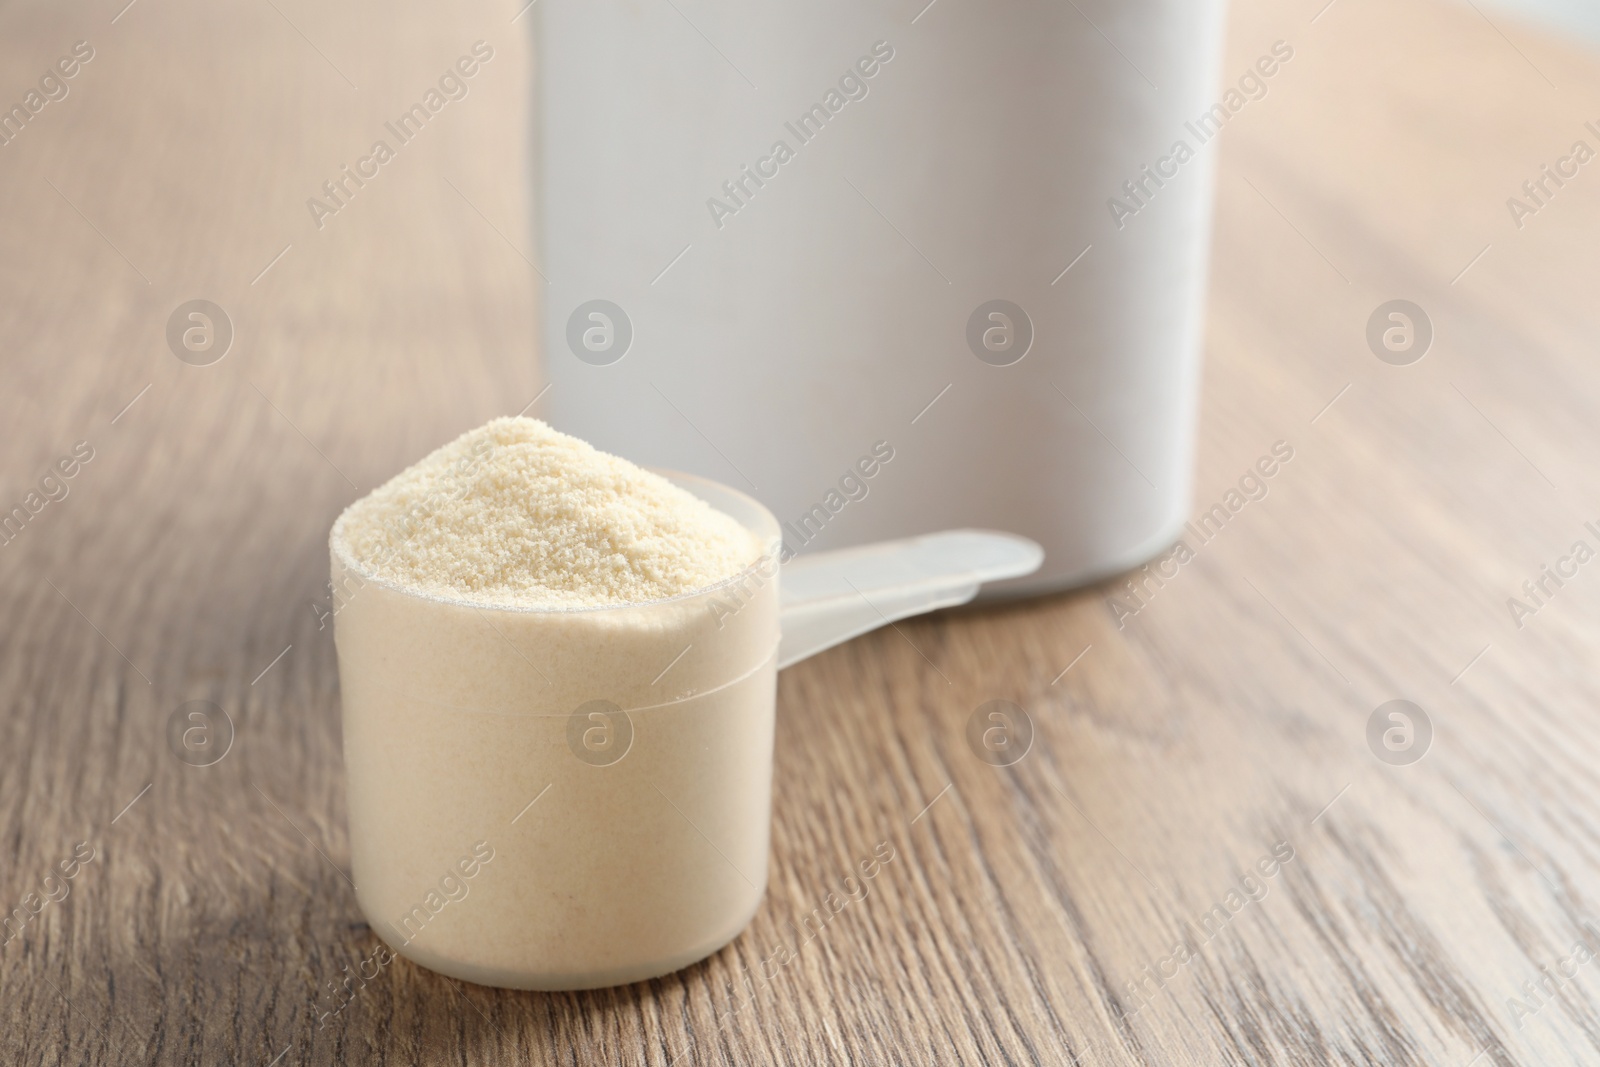 Photo of Scoop of protein powder on wooden table